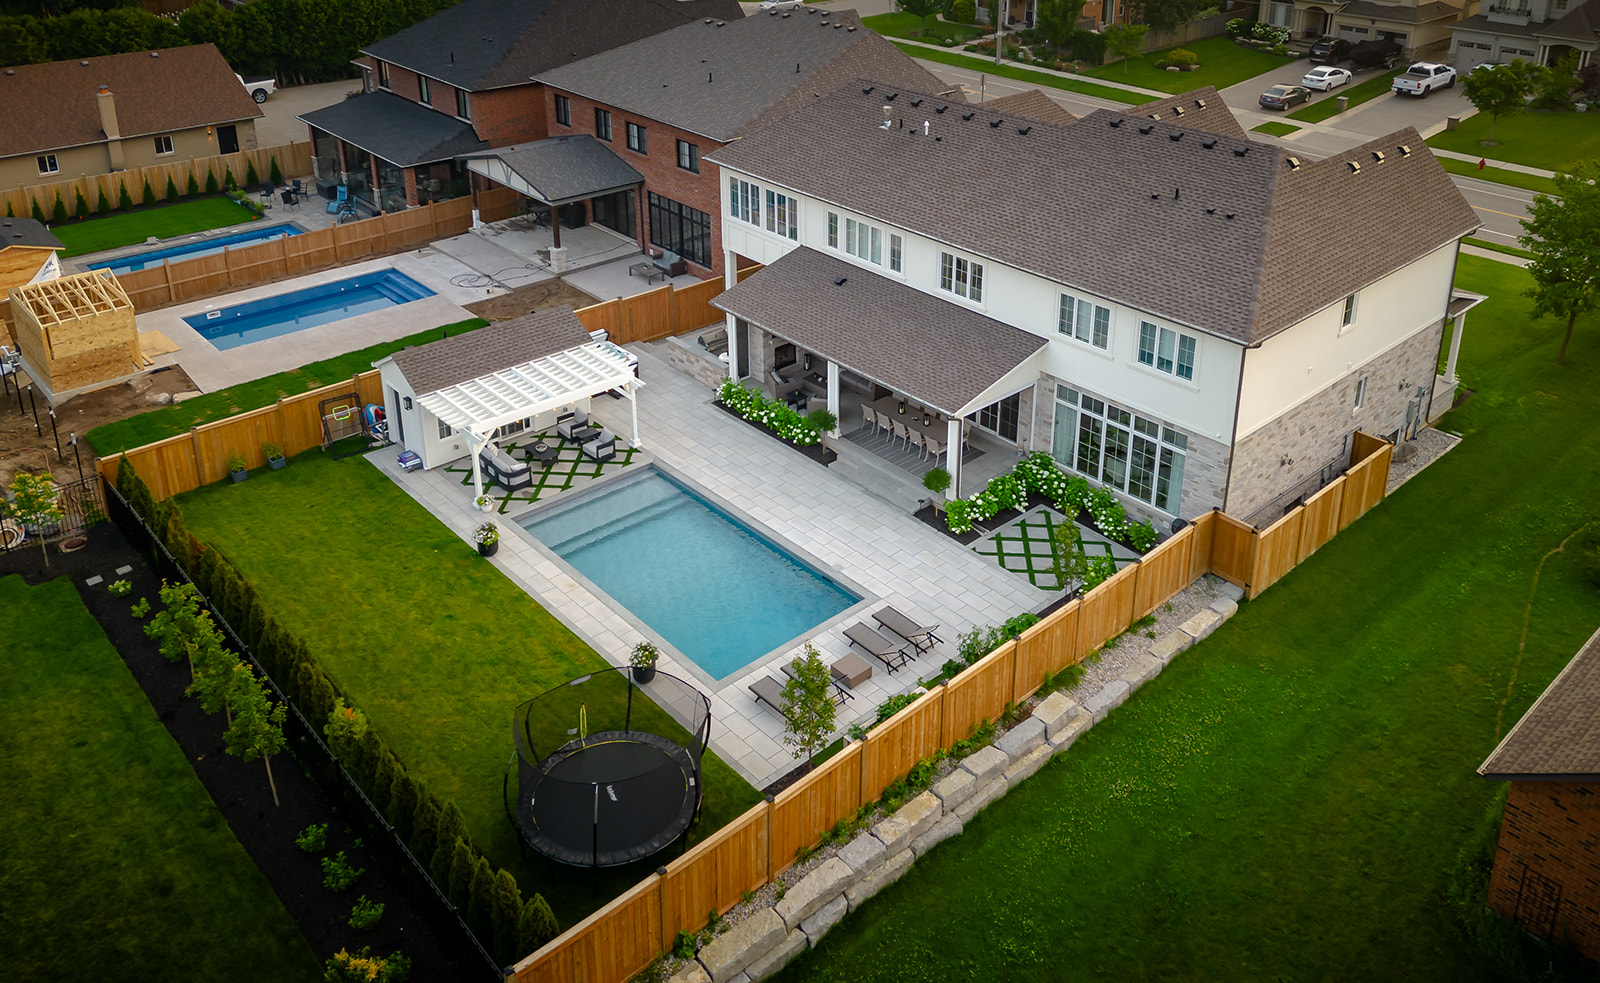 Backyard with an inground pool, a trampoline, and seating on either side of the pool.